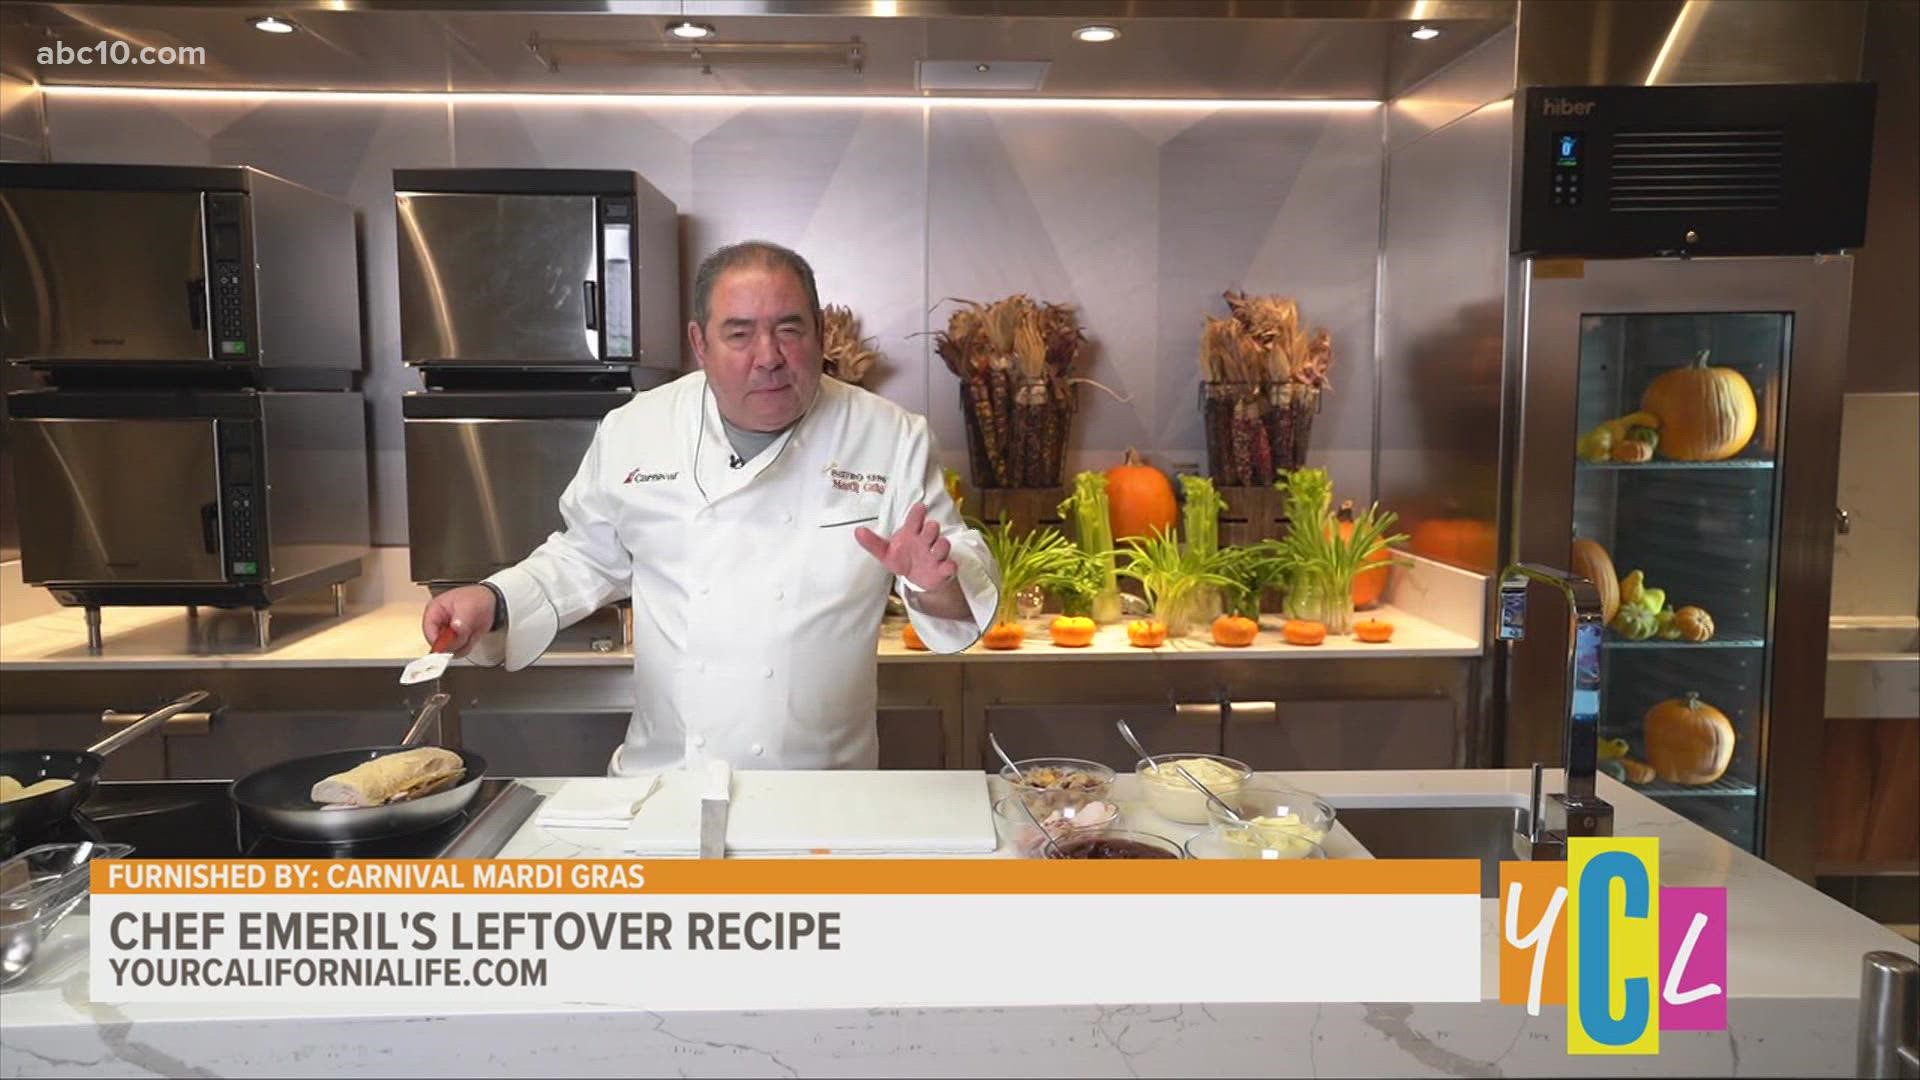 You’ve gobbled till you wobbled and now there’s a bunch of leftovers. Celebrity Chef Emeril Lagasse shares his thanksgiving leftover recipe to spice up the remains!